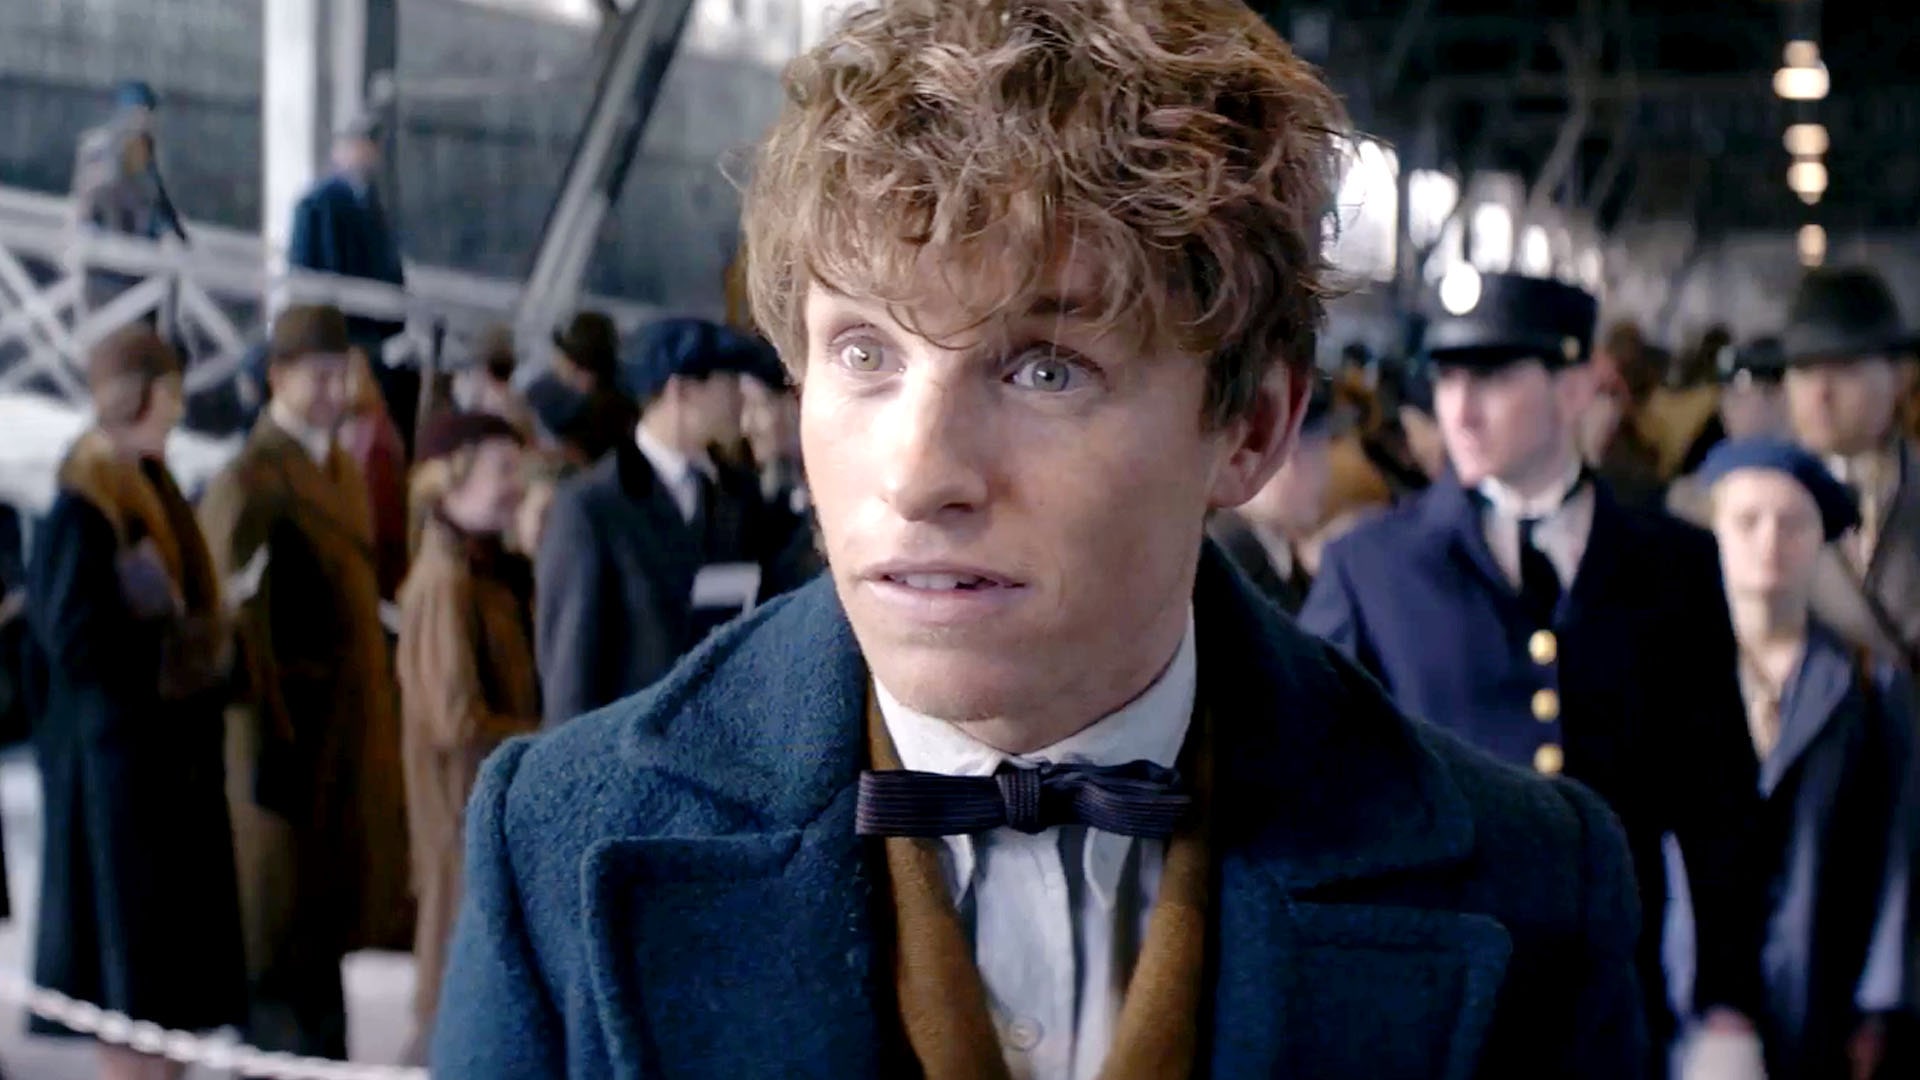 Fantastic Beasts And Where To Find Them Desktop Wallpaper - Newt Scamander X Male Reader - HD Wallpaper 